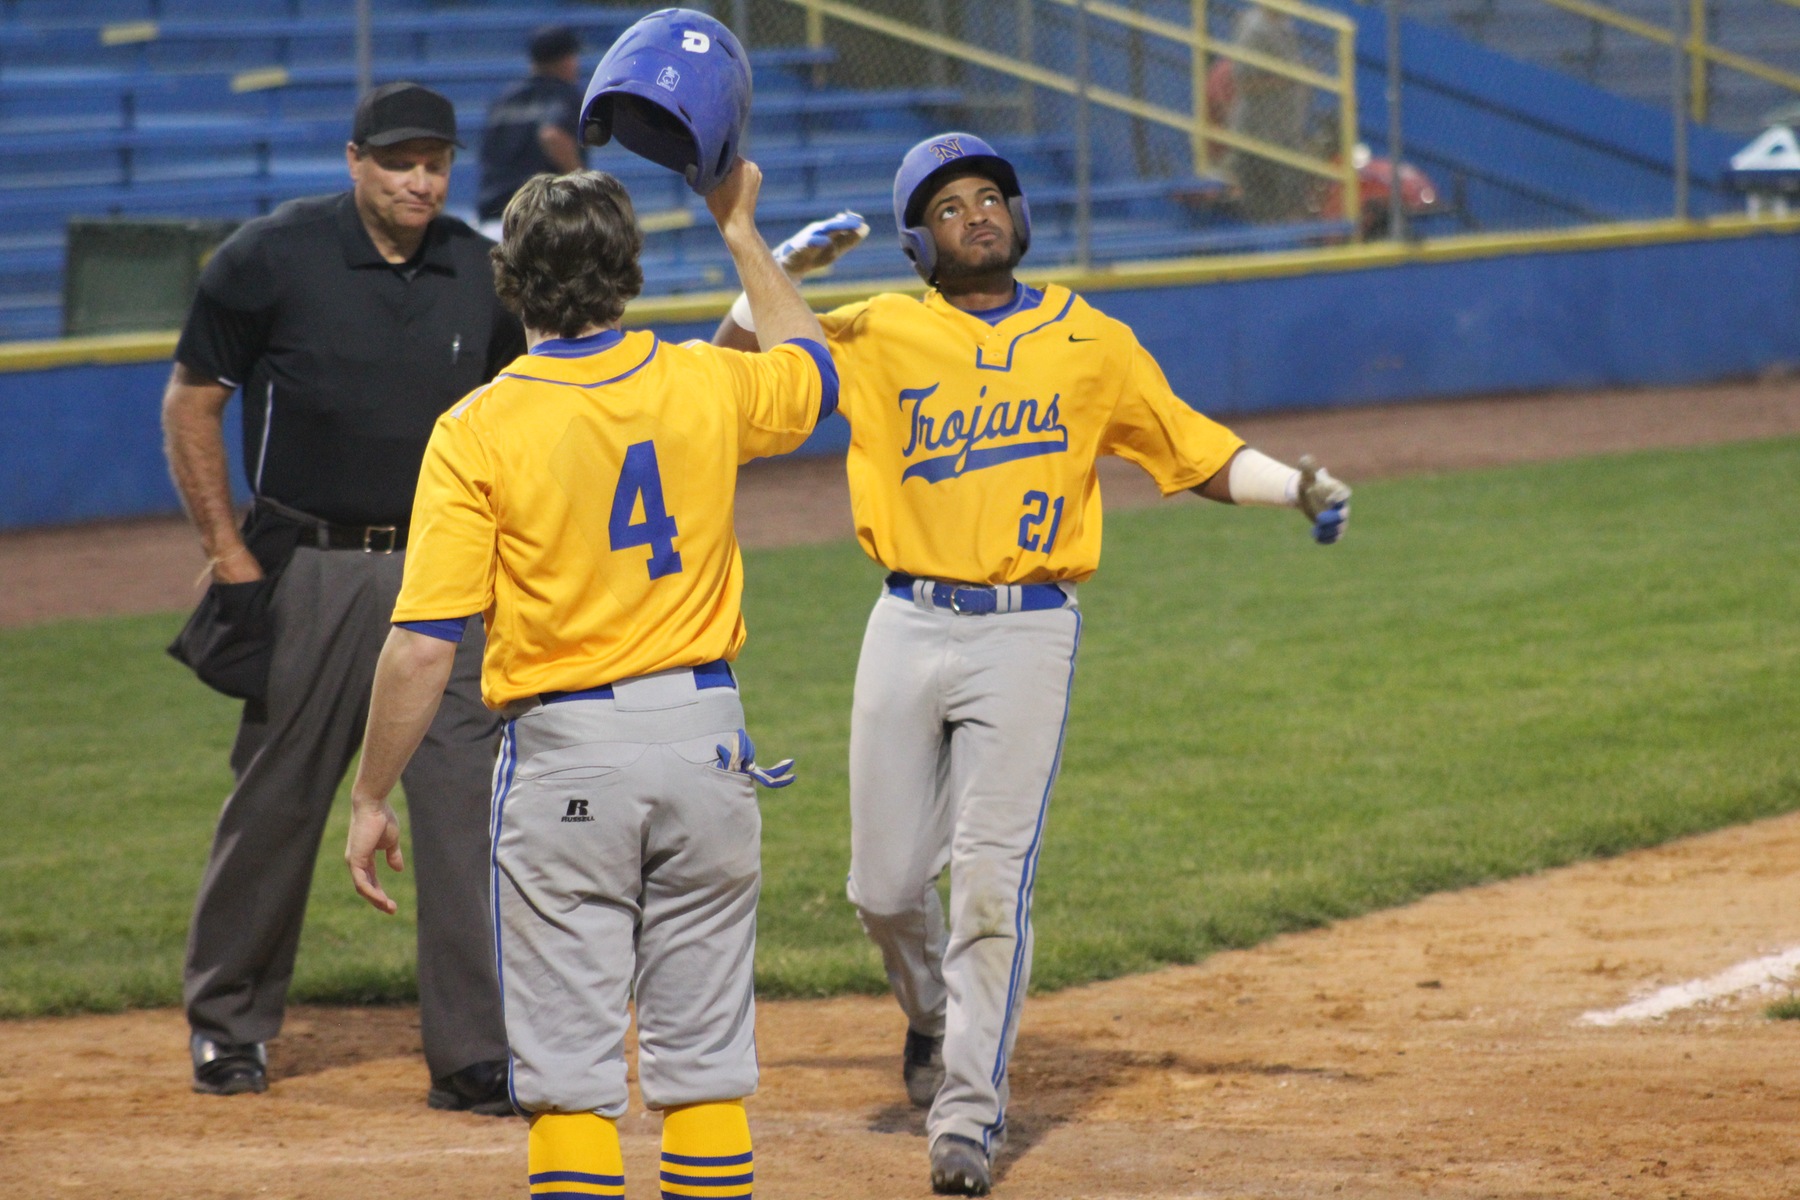 Ezequias Encarnacion approaches home plate after hitting a 3-run home run in the fifth inning Saturday against Iowa Central.